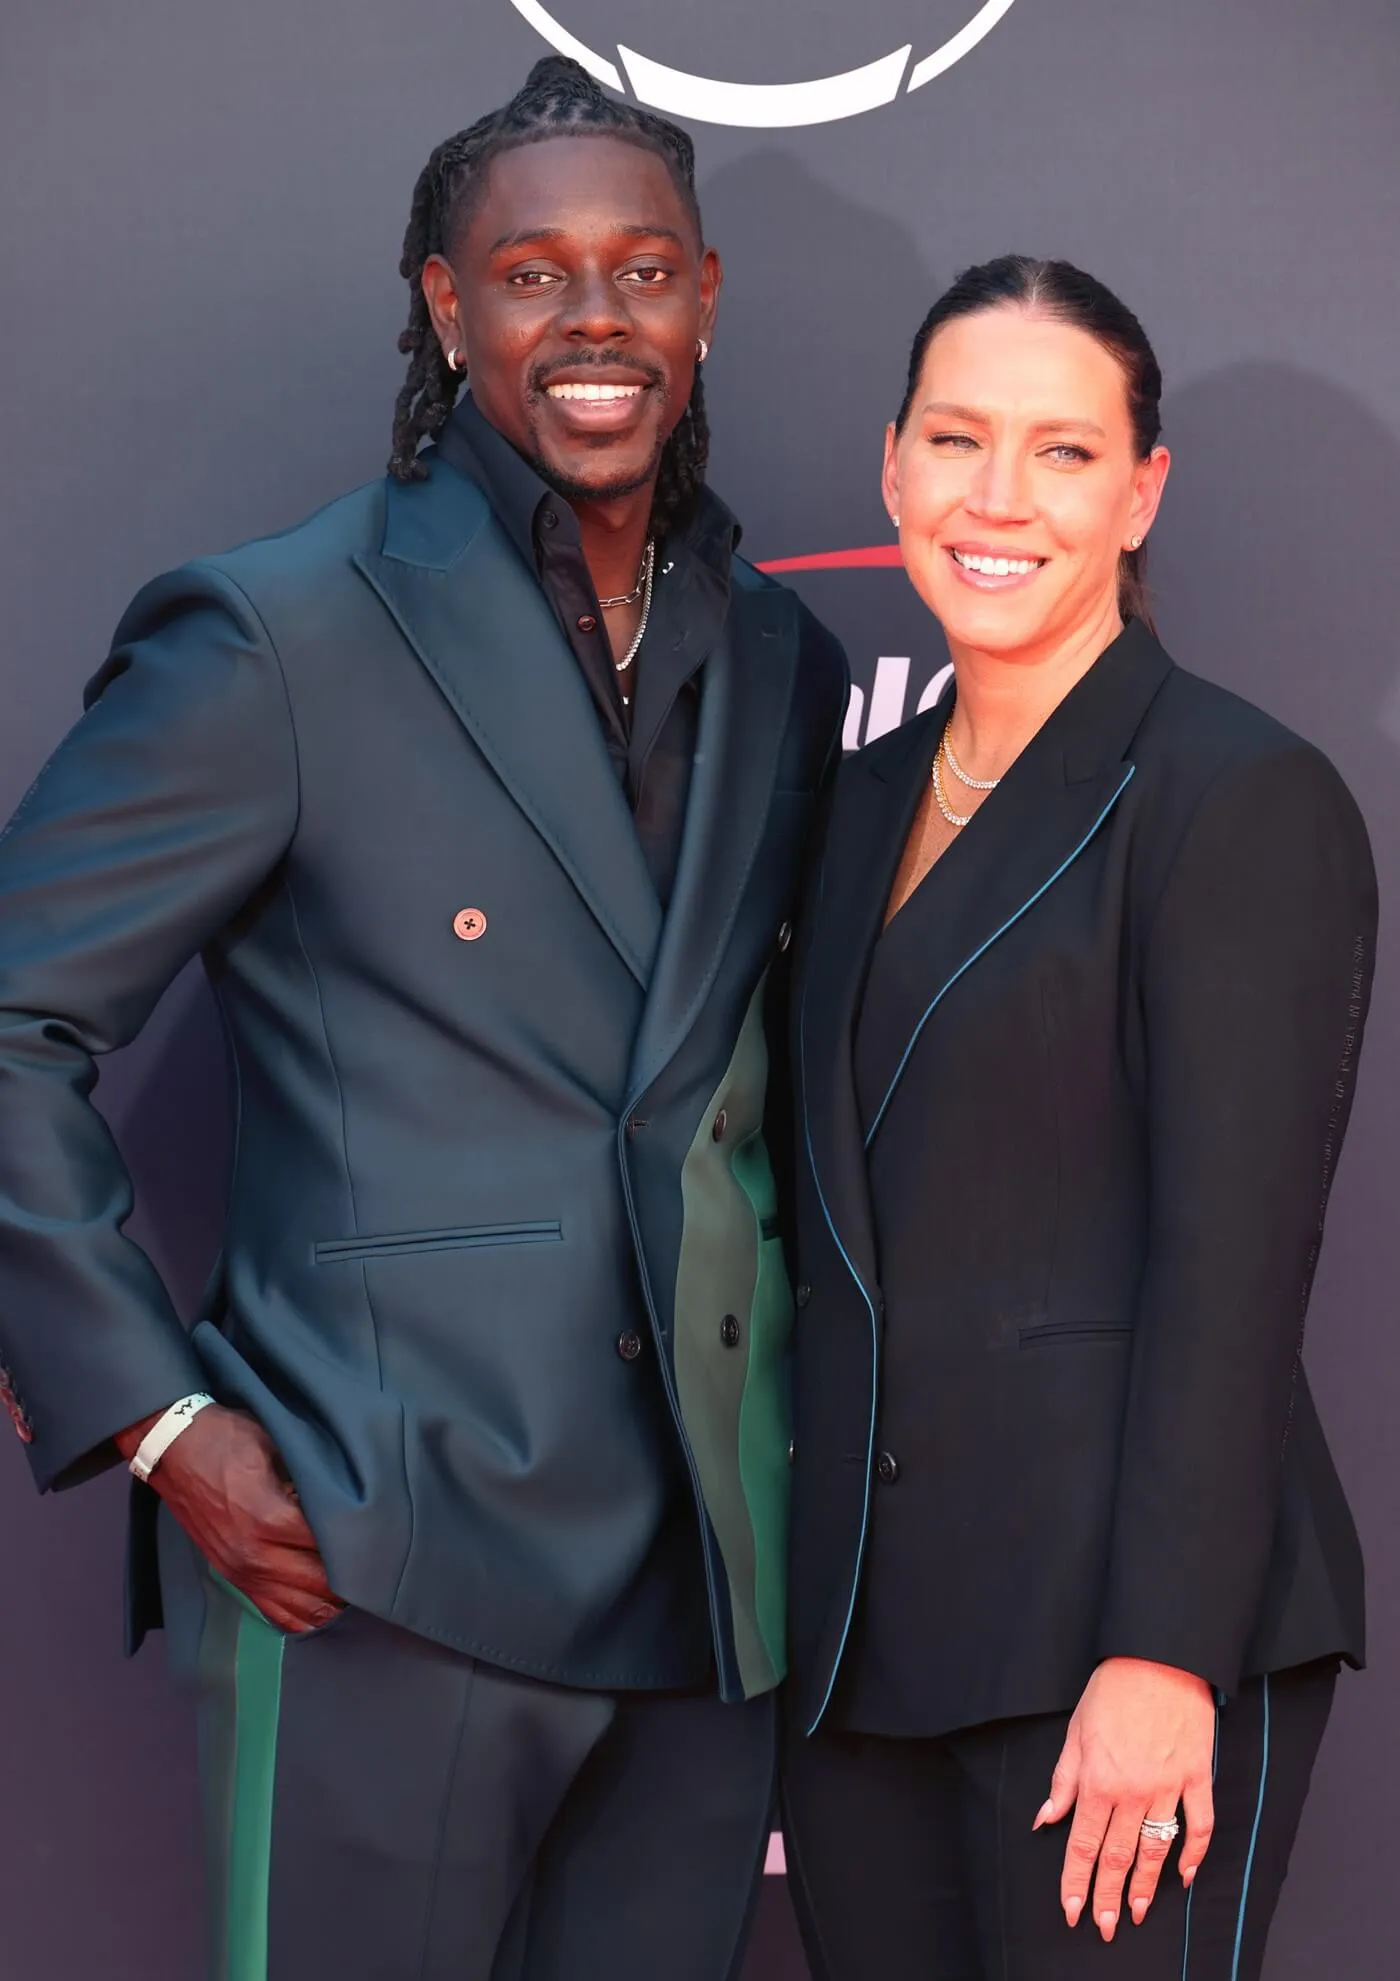 Jrue Holiday and Lauren Holiday attend the 2023 ESPYs Awards in Hollywood